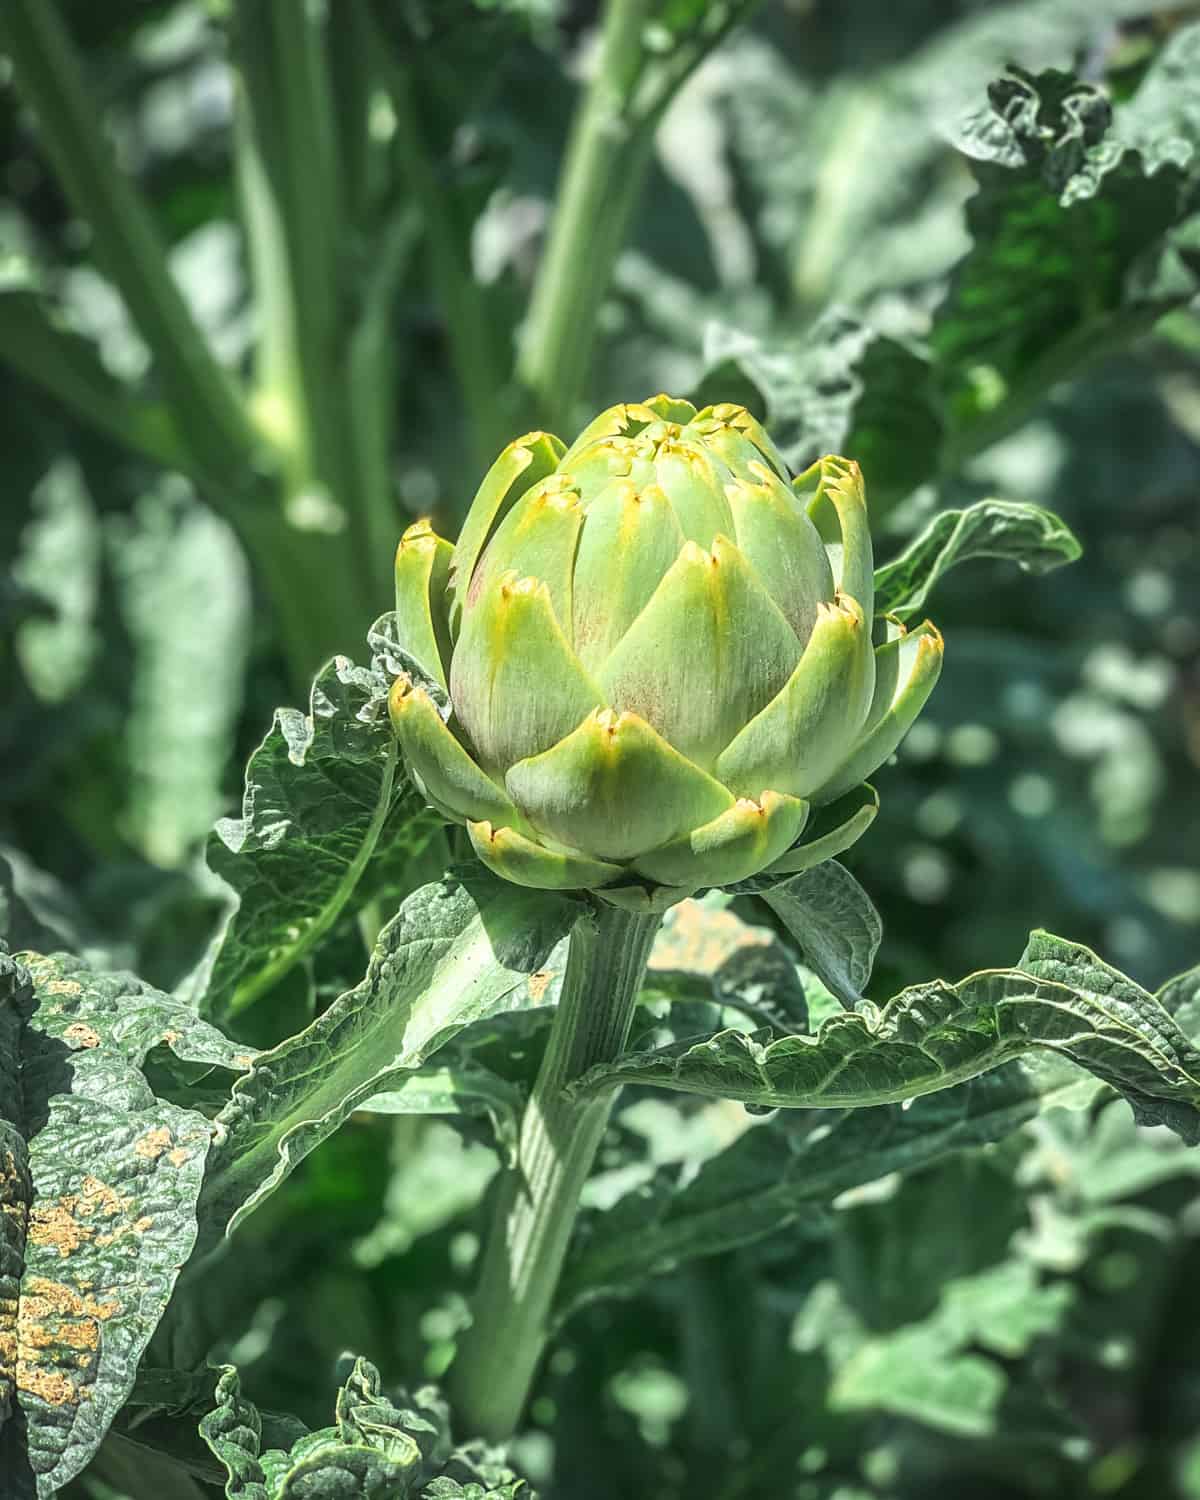 An artichoke growing on a stalk with leaves.